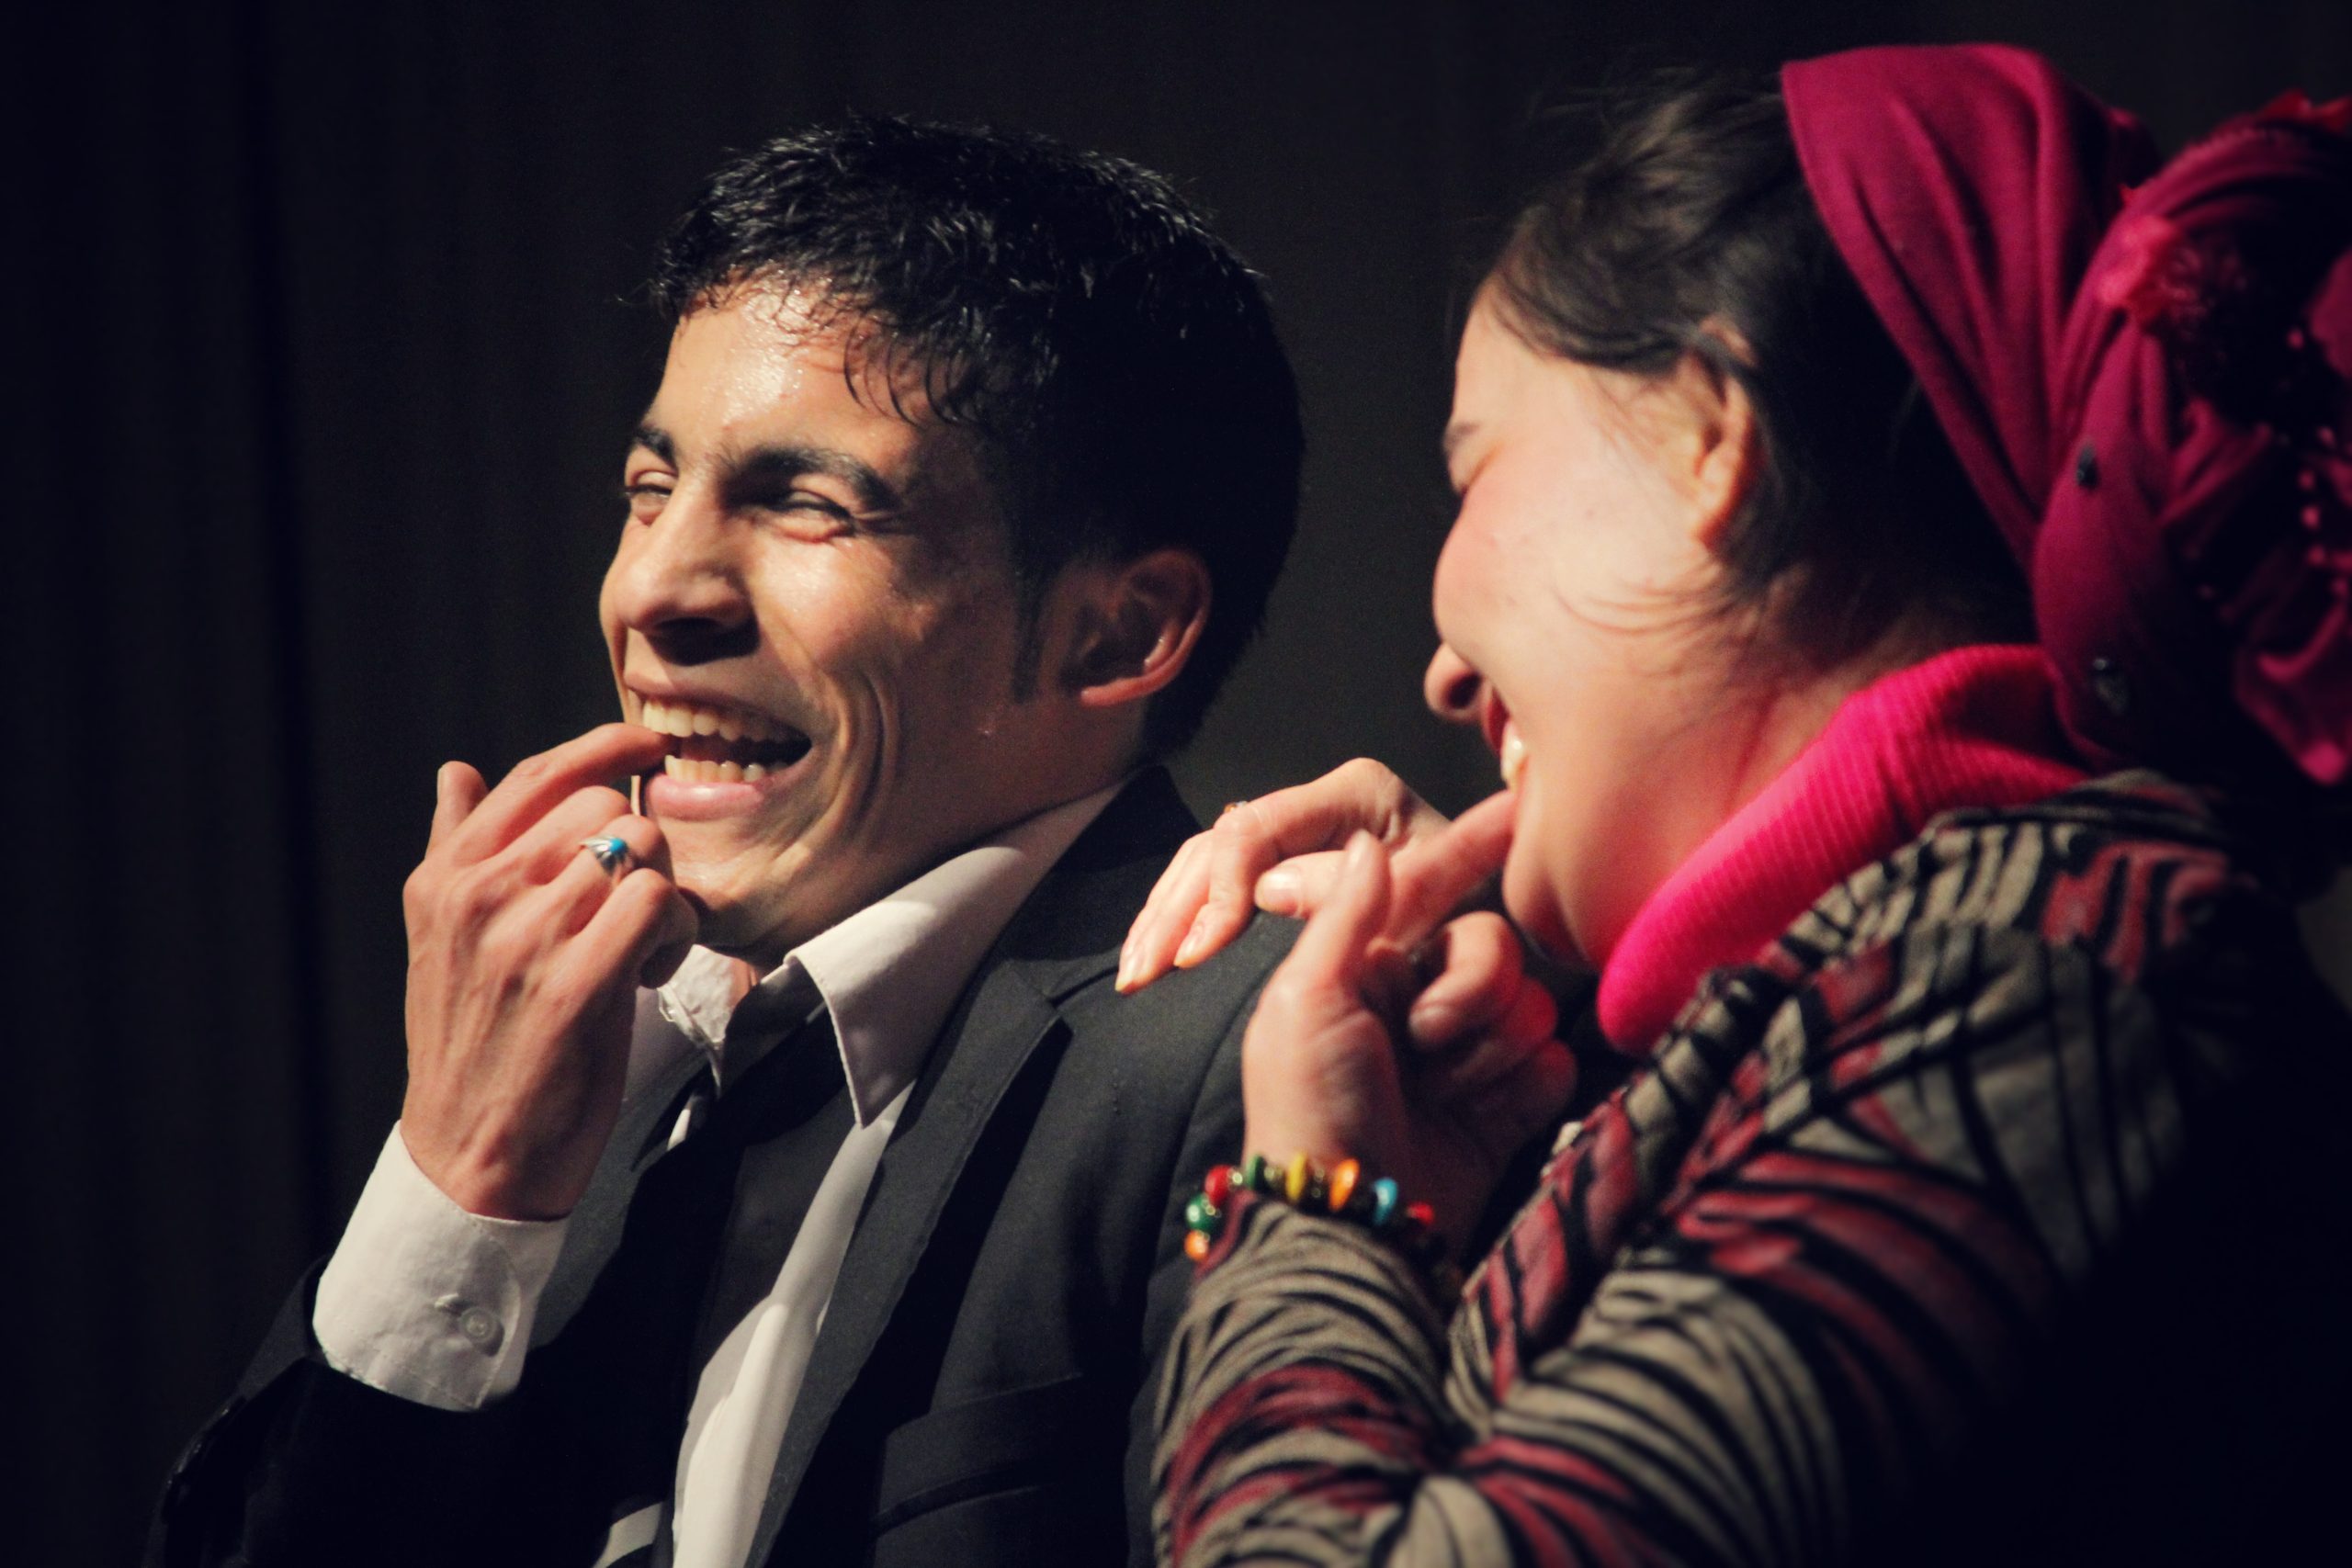 https://www.betterplace.org/en/projects/28095-save-the-afghan-theater-support-the-making-of-student-10-plays-in-autumn